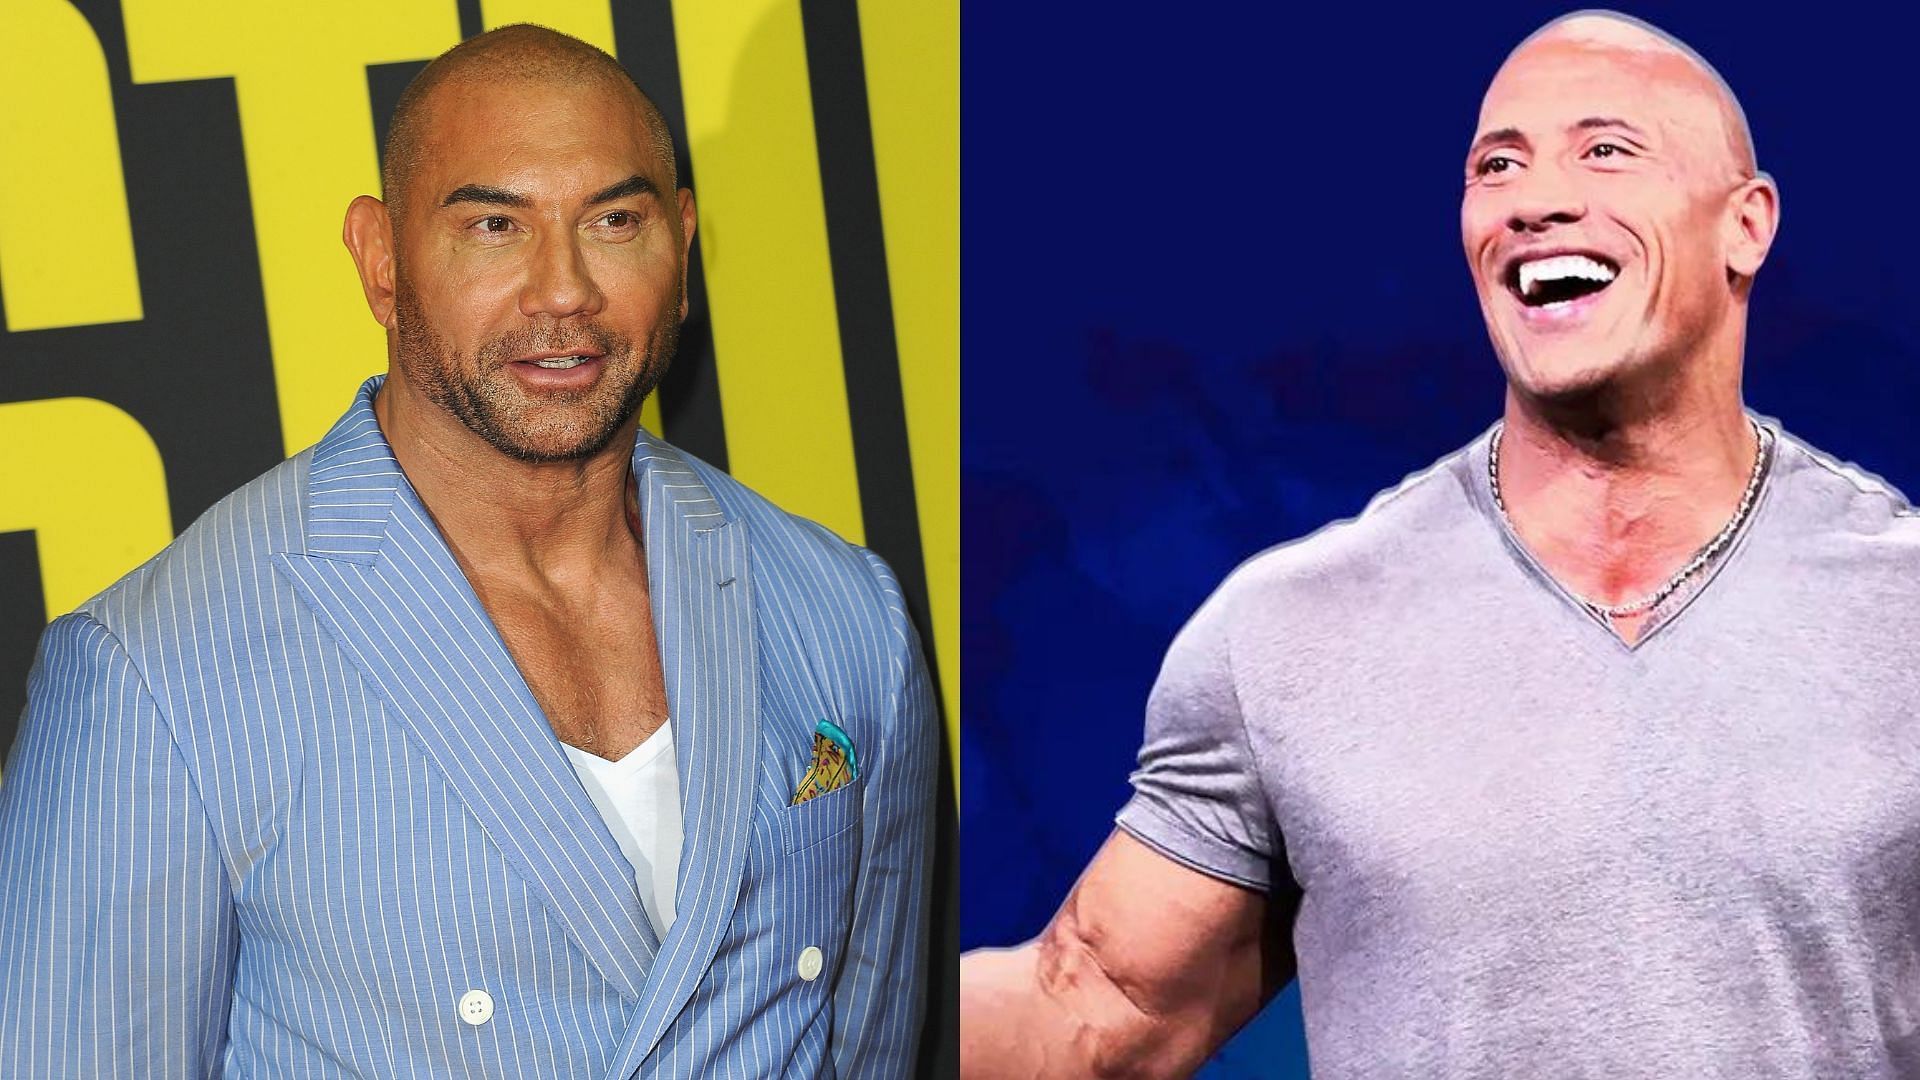 Dave Bautista sheds light on why he does not want to join Fast &amp; Furious (images via iMDb)